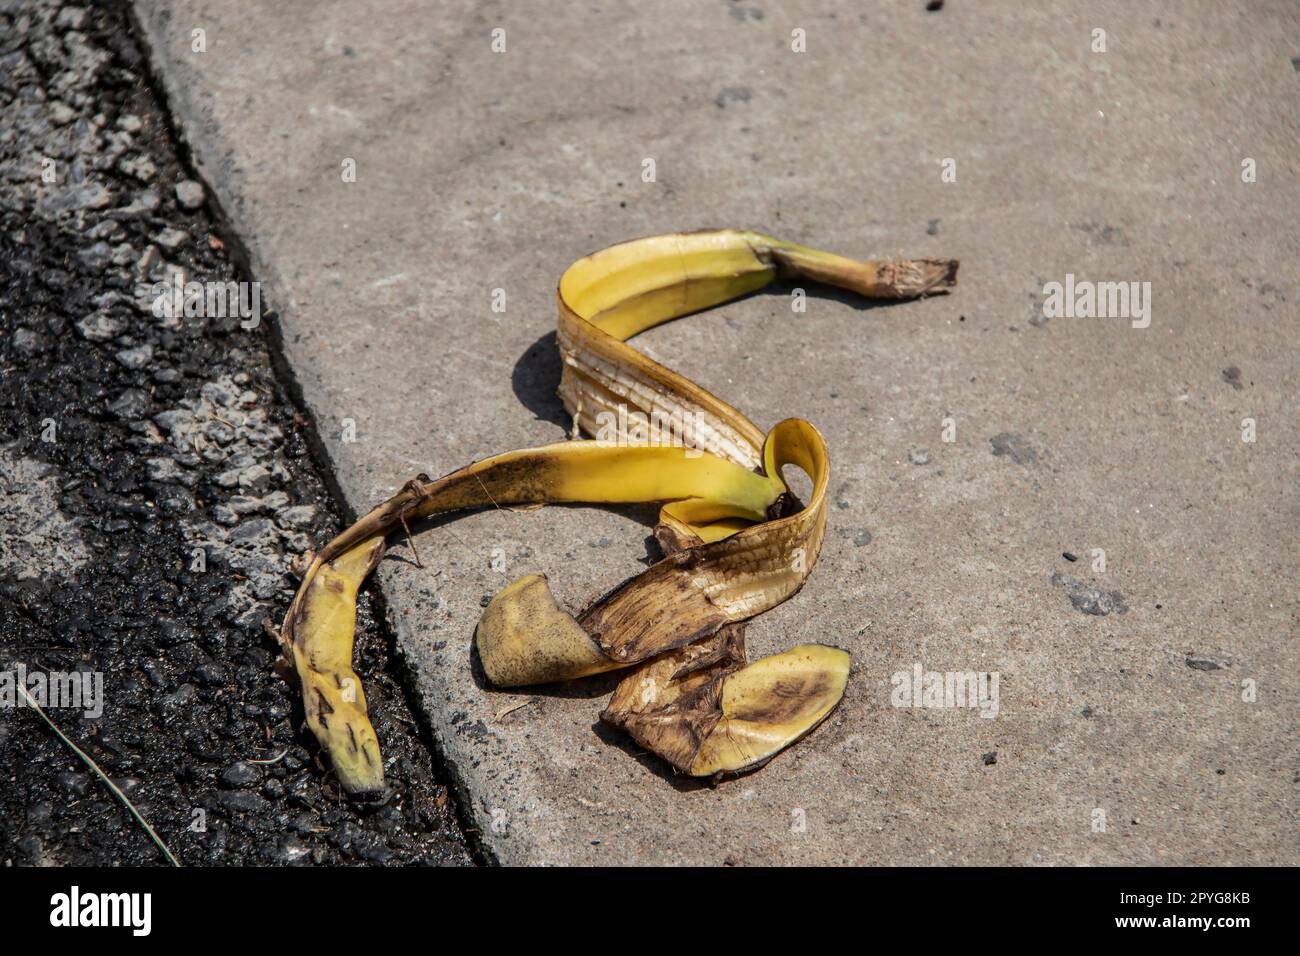 Banana peel laying on the ground - grungy grainy blacktop and sidewalk - slip and fall danger - focus on foreground. Stock Photo